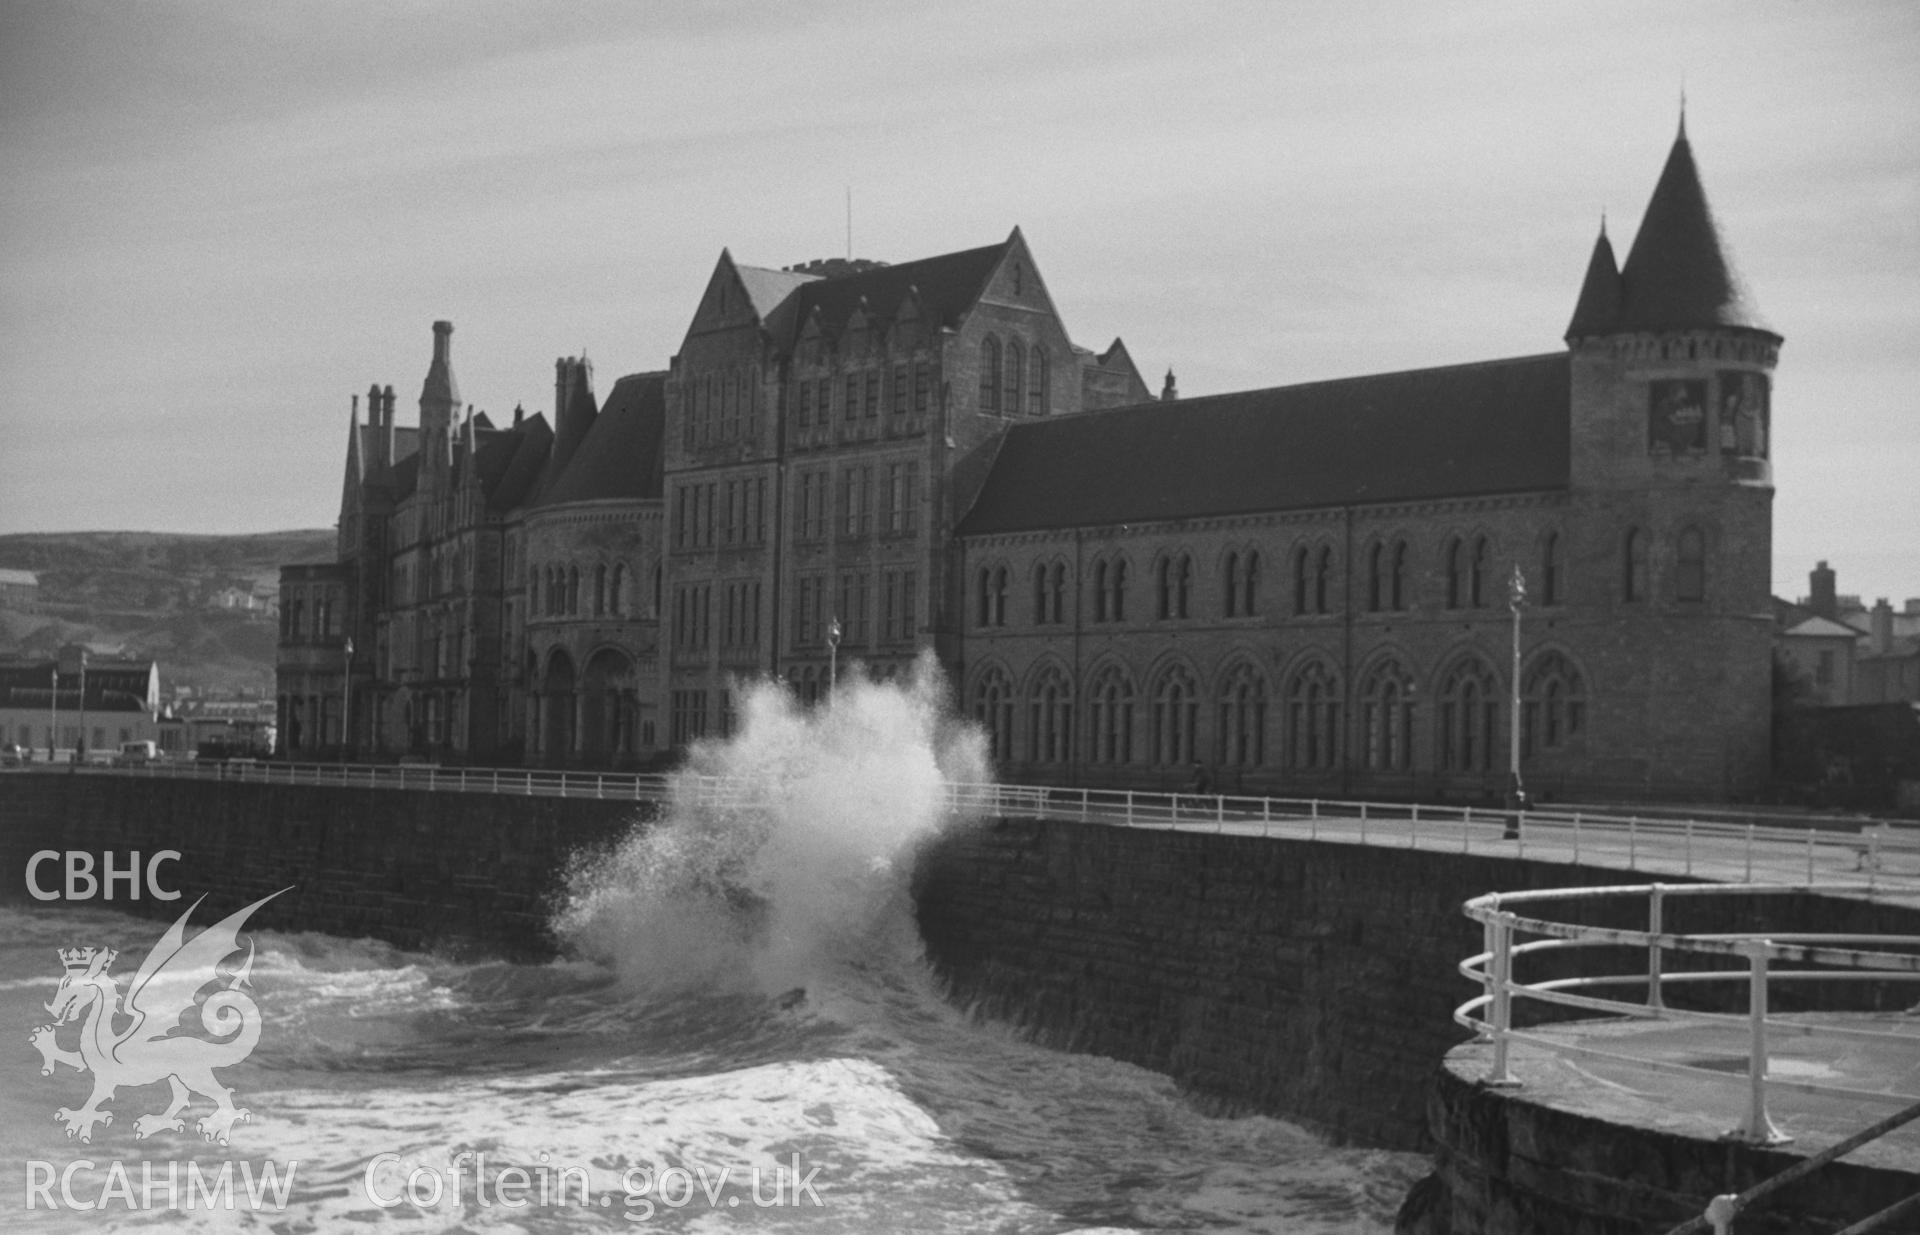 Black and White photograph showing Old College, Aberystwyth during storm. Photographed by Arthur Chater in April 1962, from the promenade (Grid Reference: SN 5794 8162, looking north east).